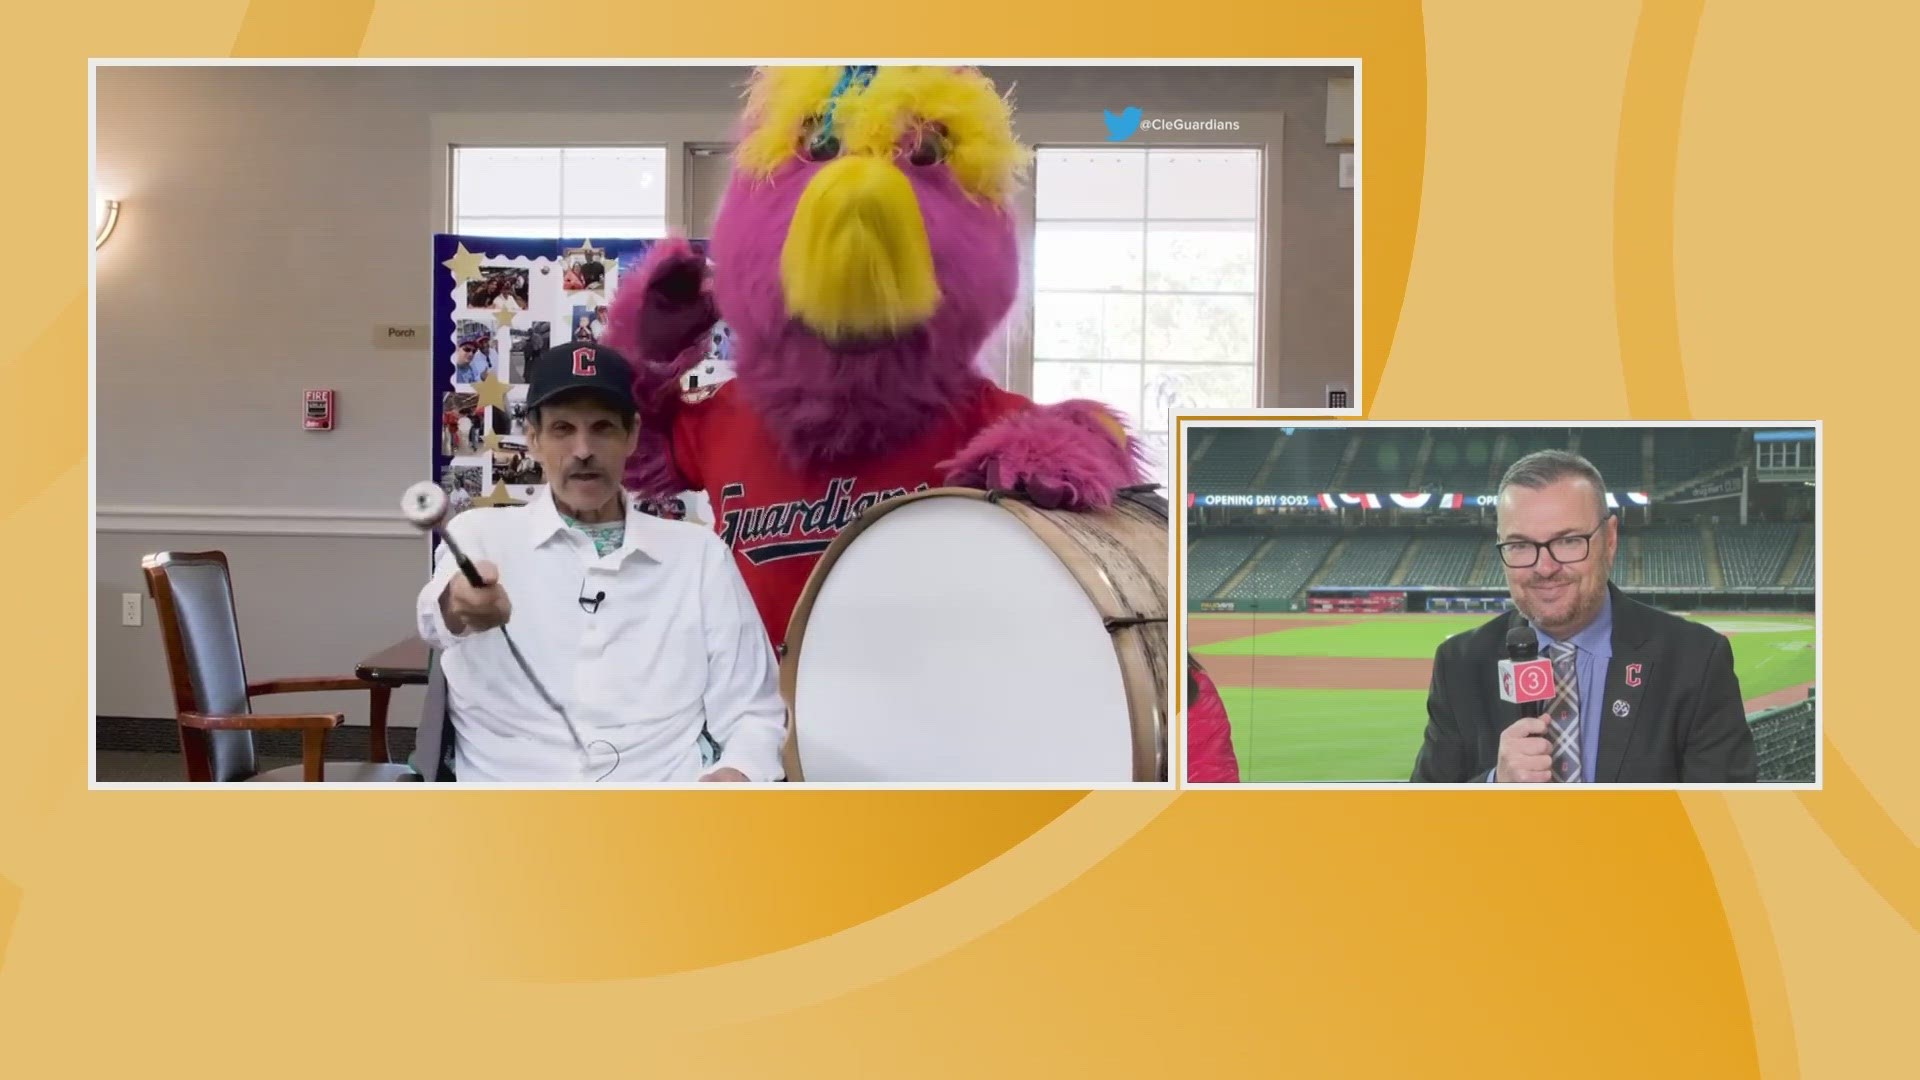 It will be a special moment as Slider the mascot pays tribute to drummer John Adams at the 2023 home opener at Progressive Field.